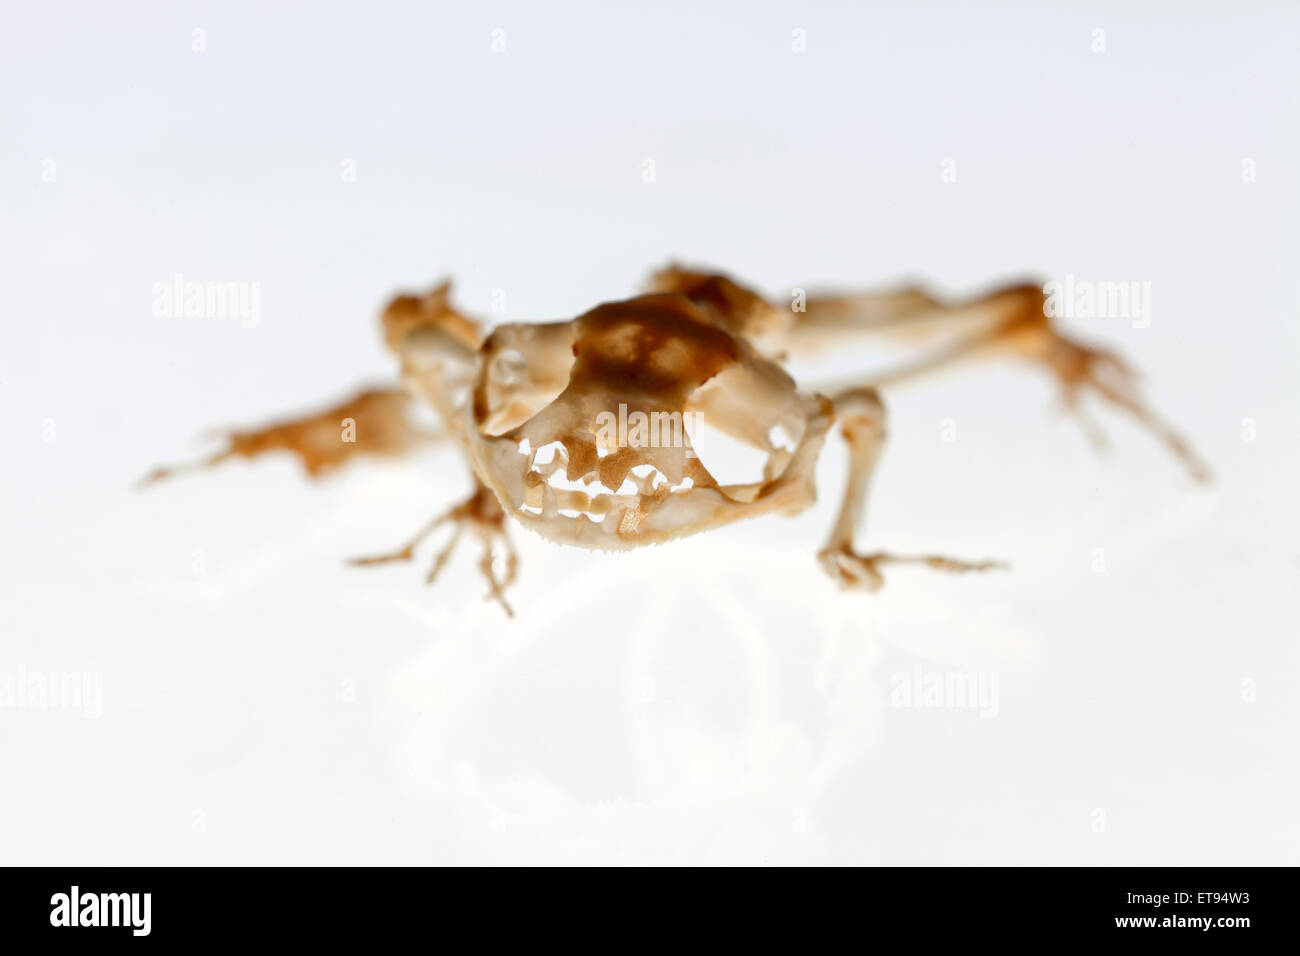 Berlin, Germany, skeleton of a common frog Stock Photo